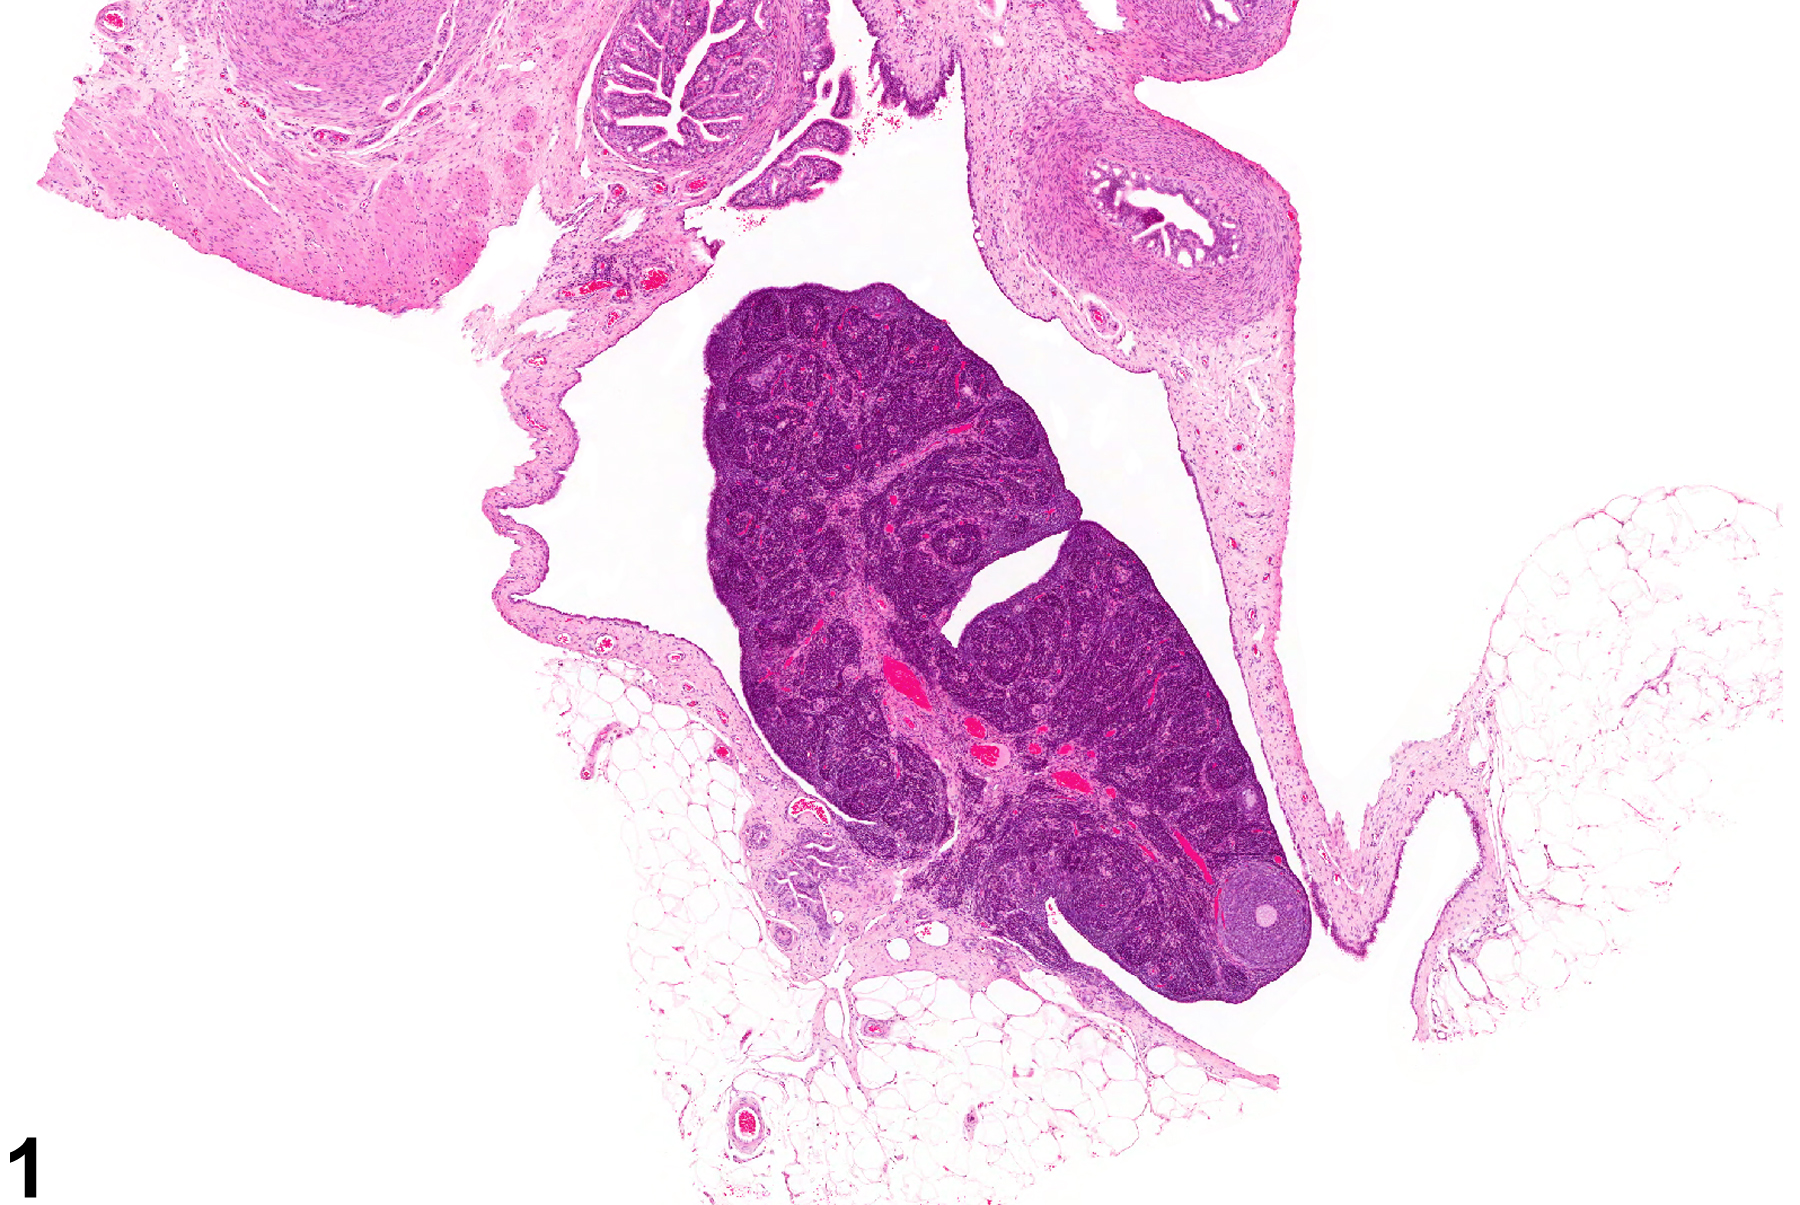 Image of atrophy in the ovary from a female F344/N rat in a chronic study